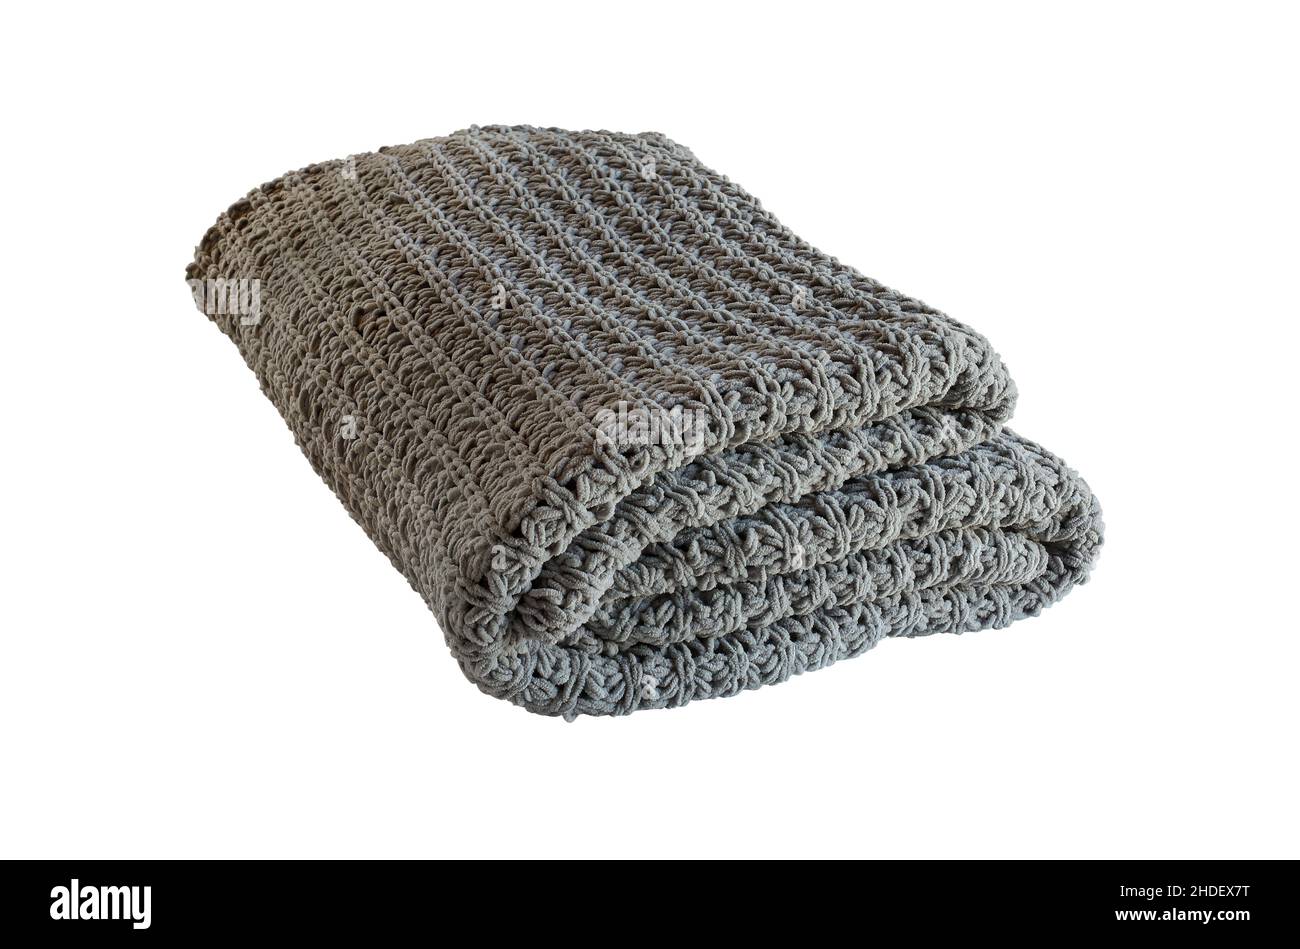 Isolated warm woven knit gray blanket folded over a white background with clipping path. Stock Photo